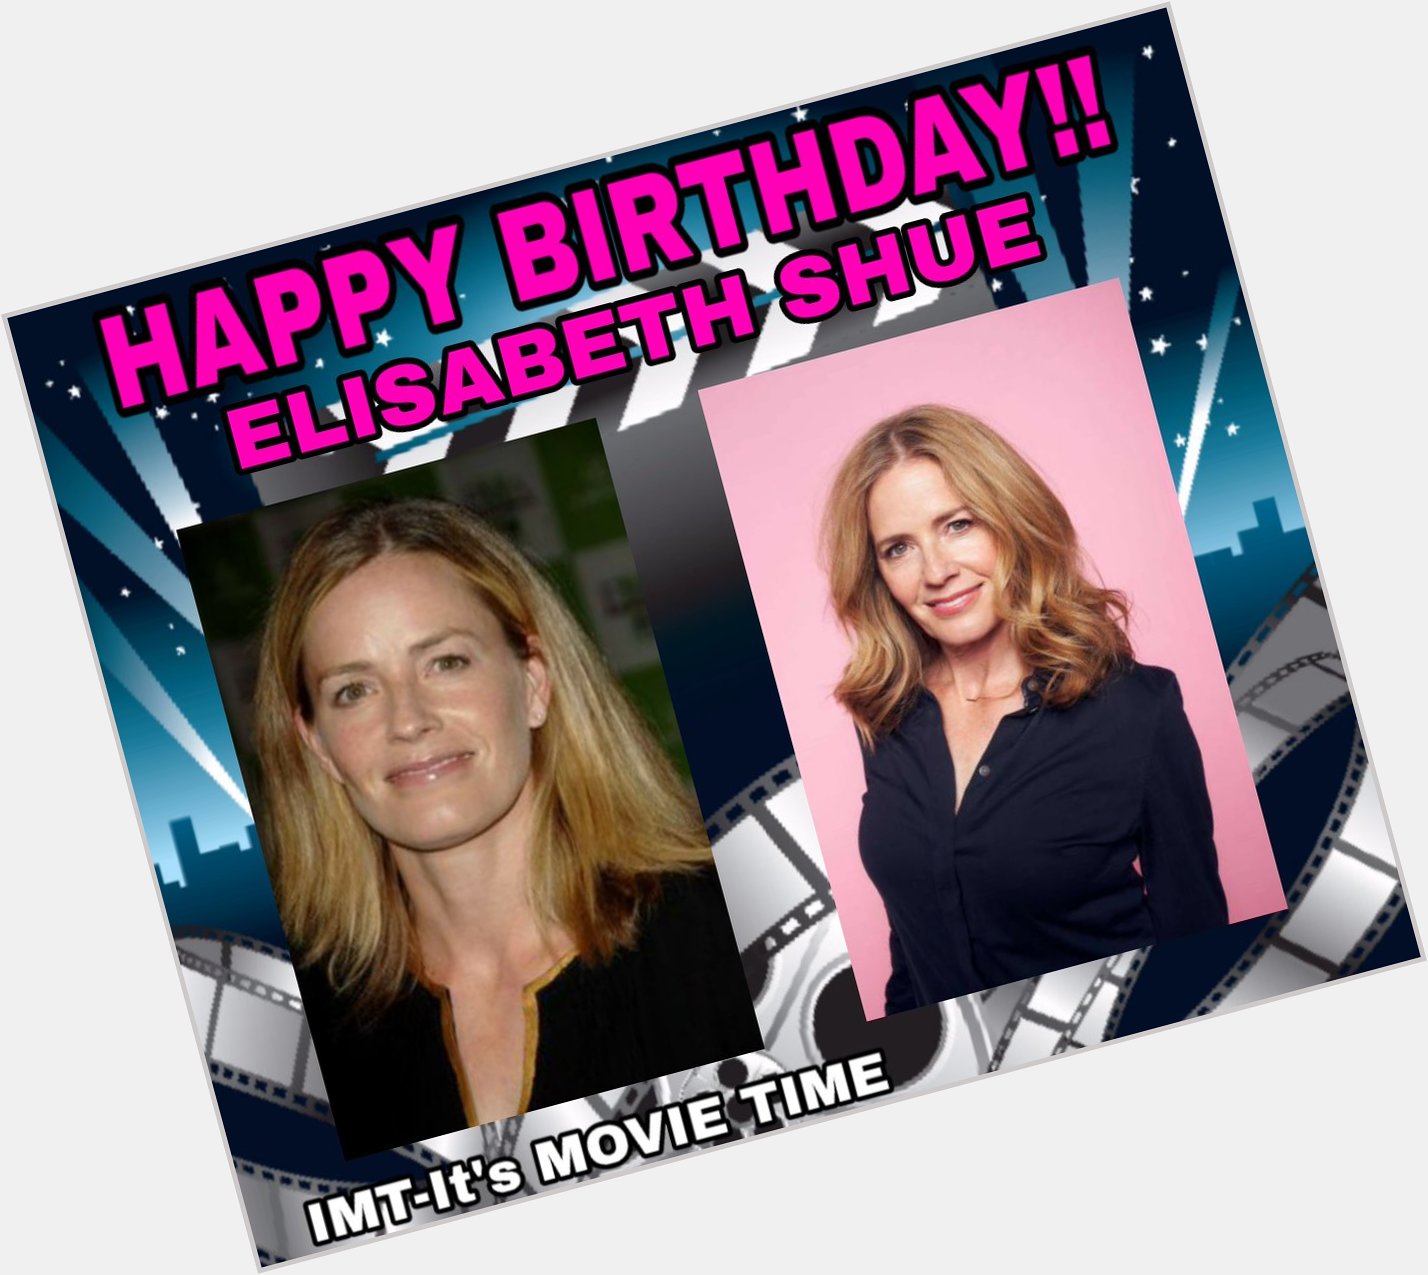 Happy Birthday to Elisabeth Shue! The actress is celebrating 57 years. 